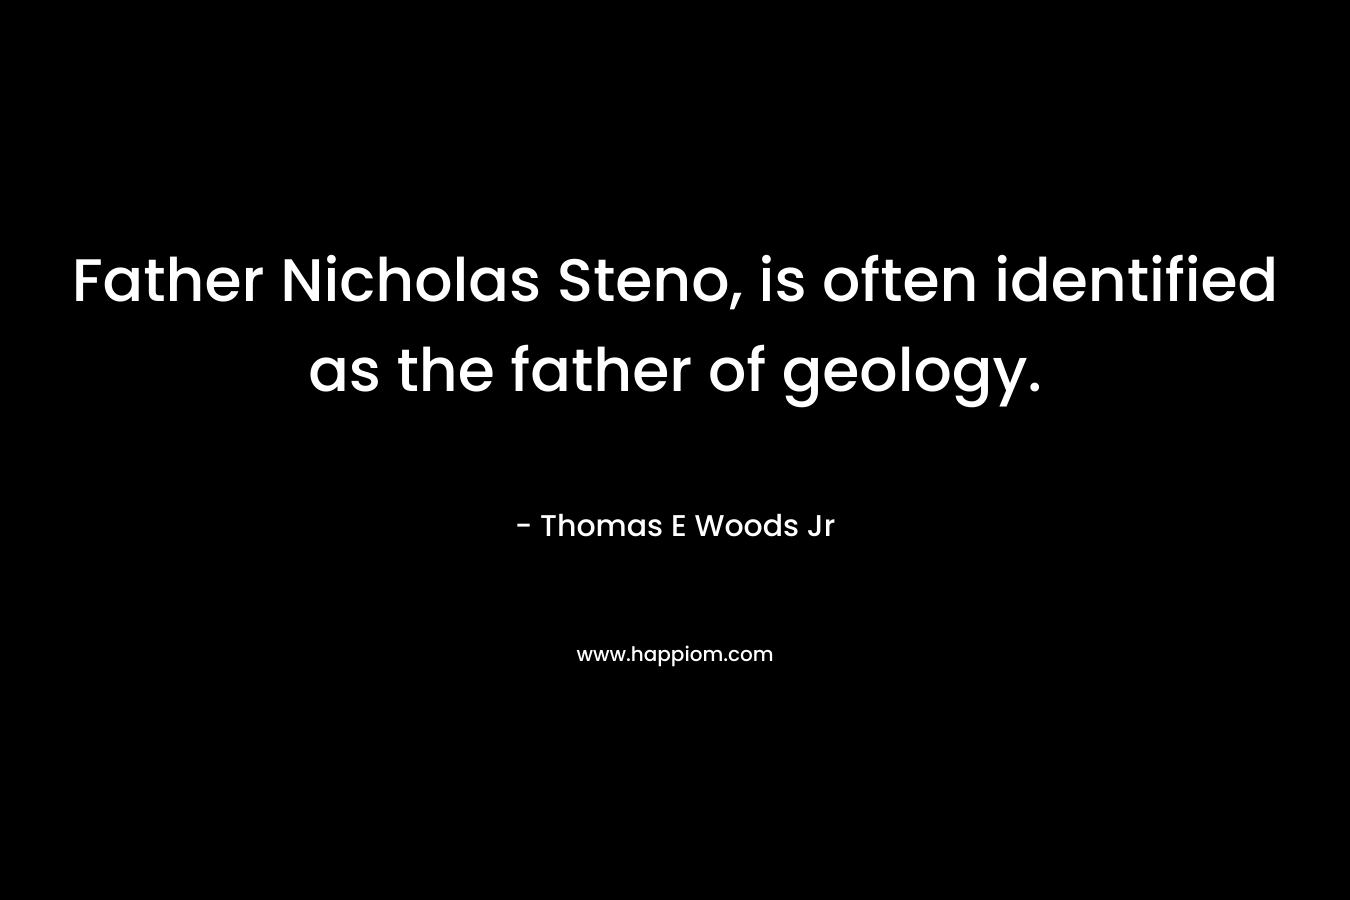 Father Nicholas Steno, is often identified as the father of geology.